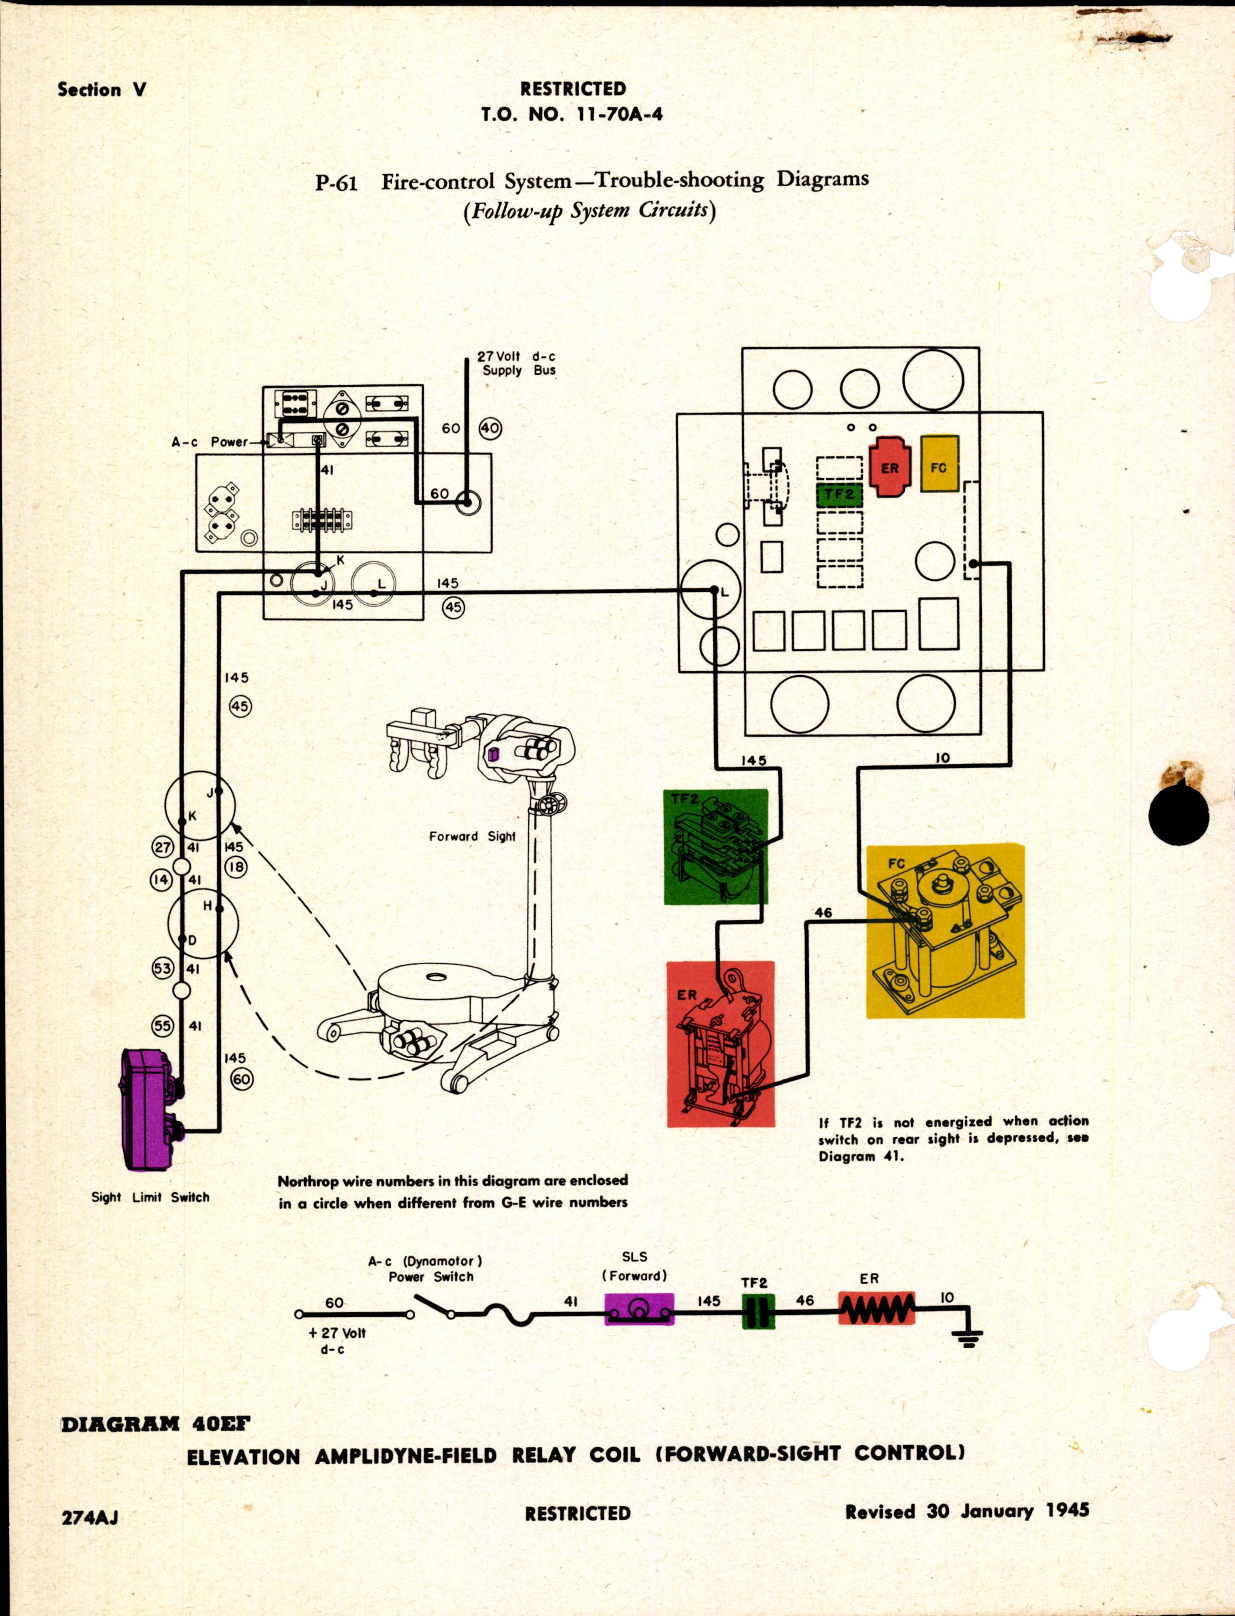 Sample page 14 from AirCorps Library document: Operation and Service Instructions for Central-Station Fire-Control System for P-61